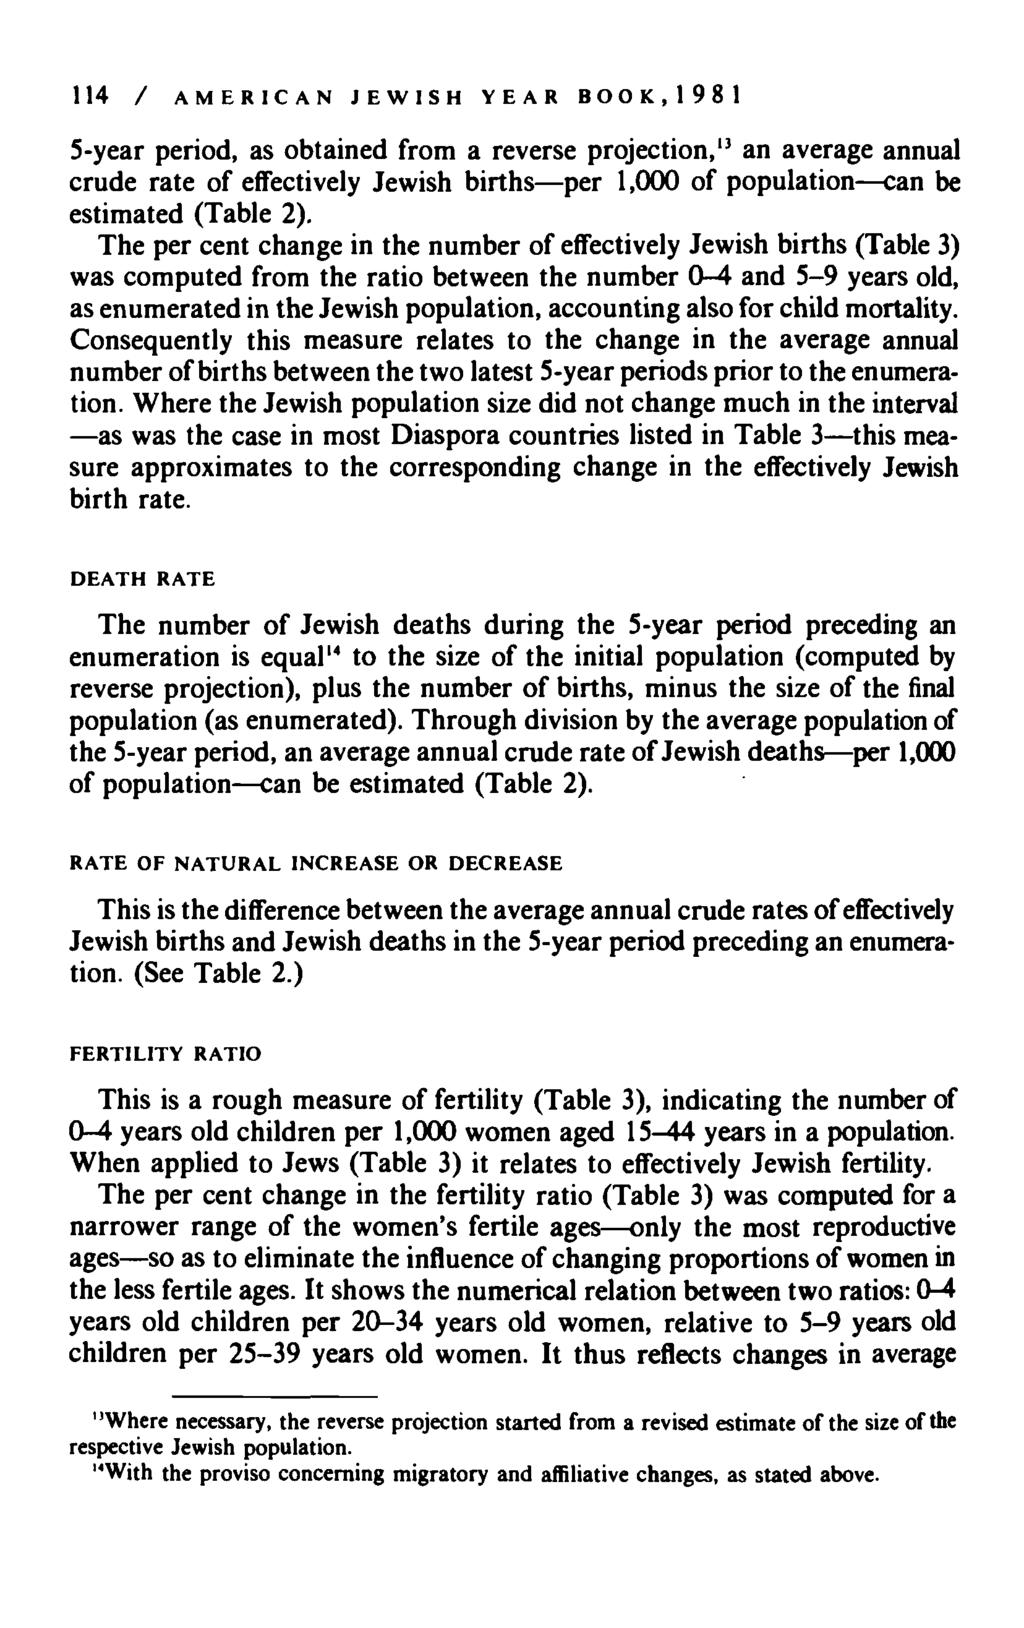 114 / A M E R I C A N J E W I S H Y E A R B O O K, 1 9 8 1 5-year period, as obtained from a reverse projection," an average annual crude rate of effectively Jewish births per 1,000 of population can